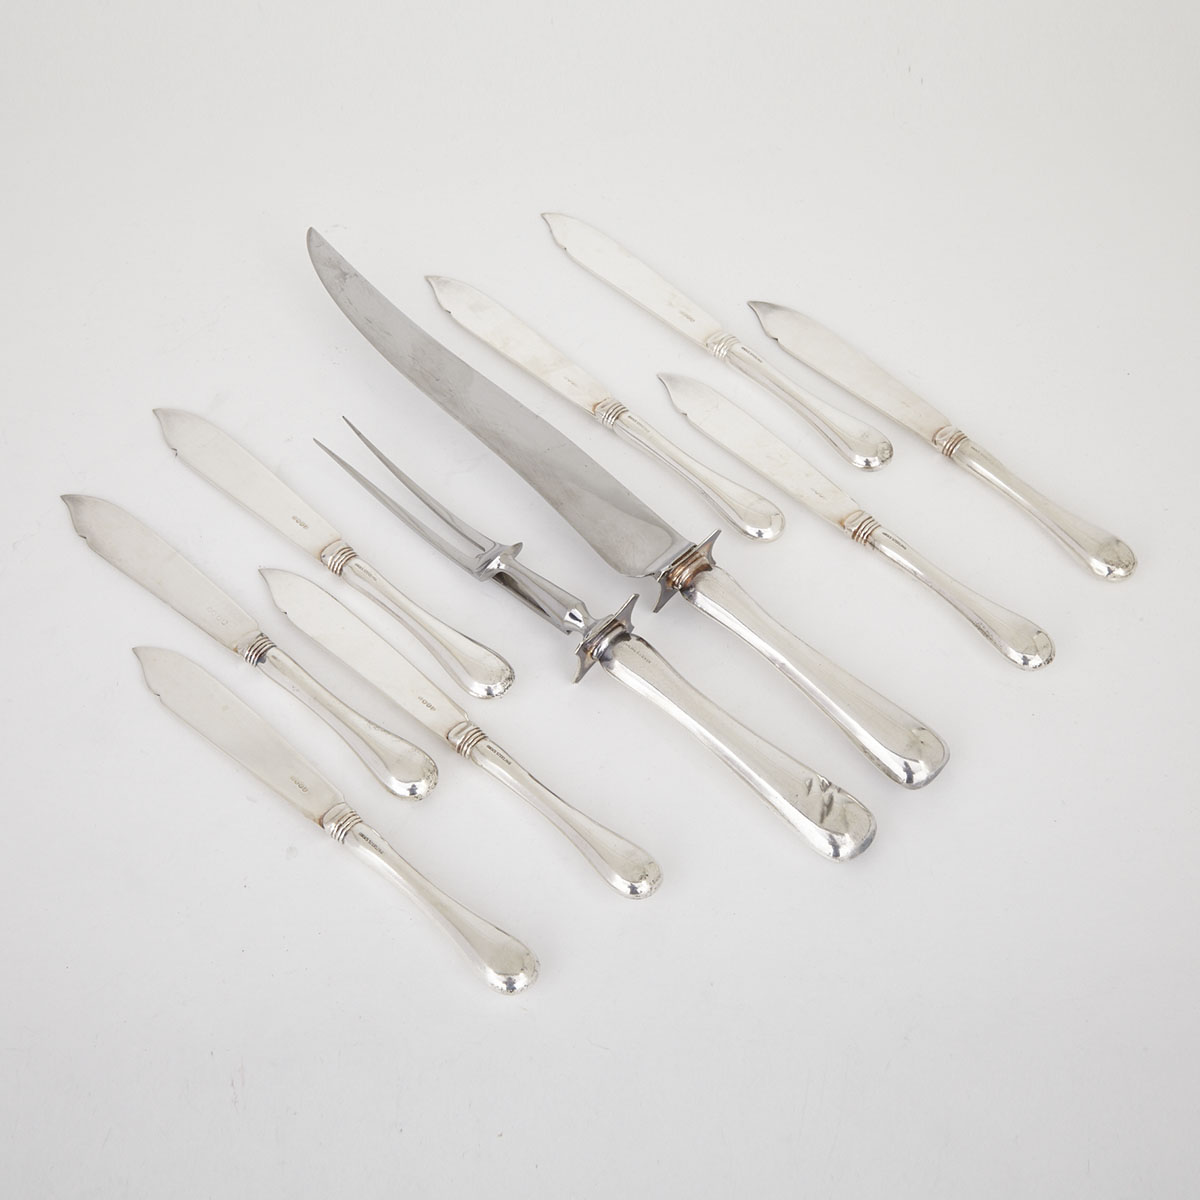 Eight Canadian Silver ‘Old English’ Pattern Fish Knives and Pair of Carvers, Henry Birks & Sons, Montreal, Que., 20th century